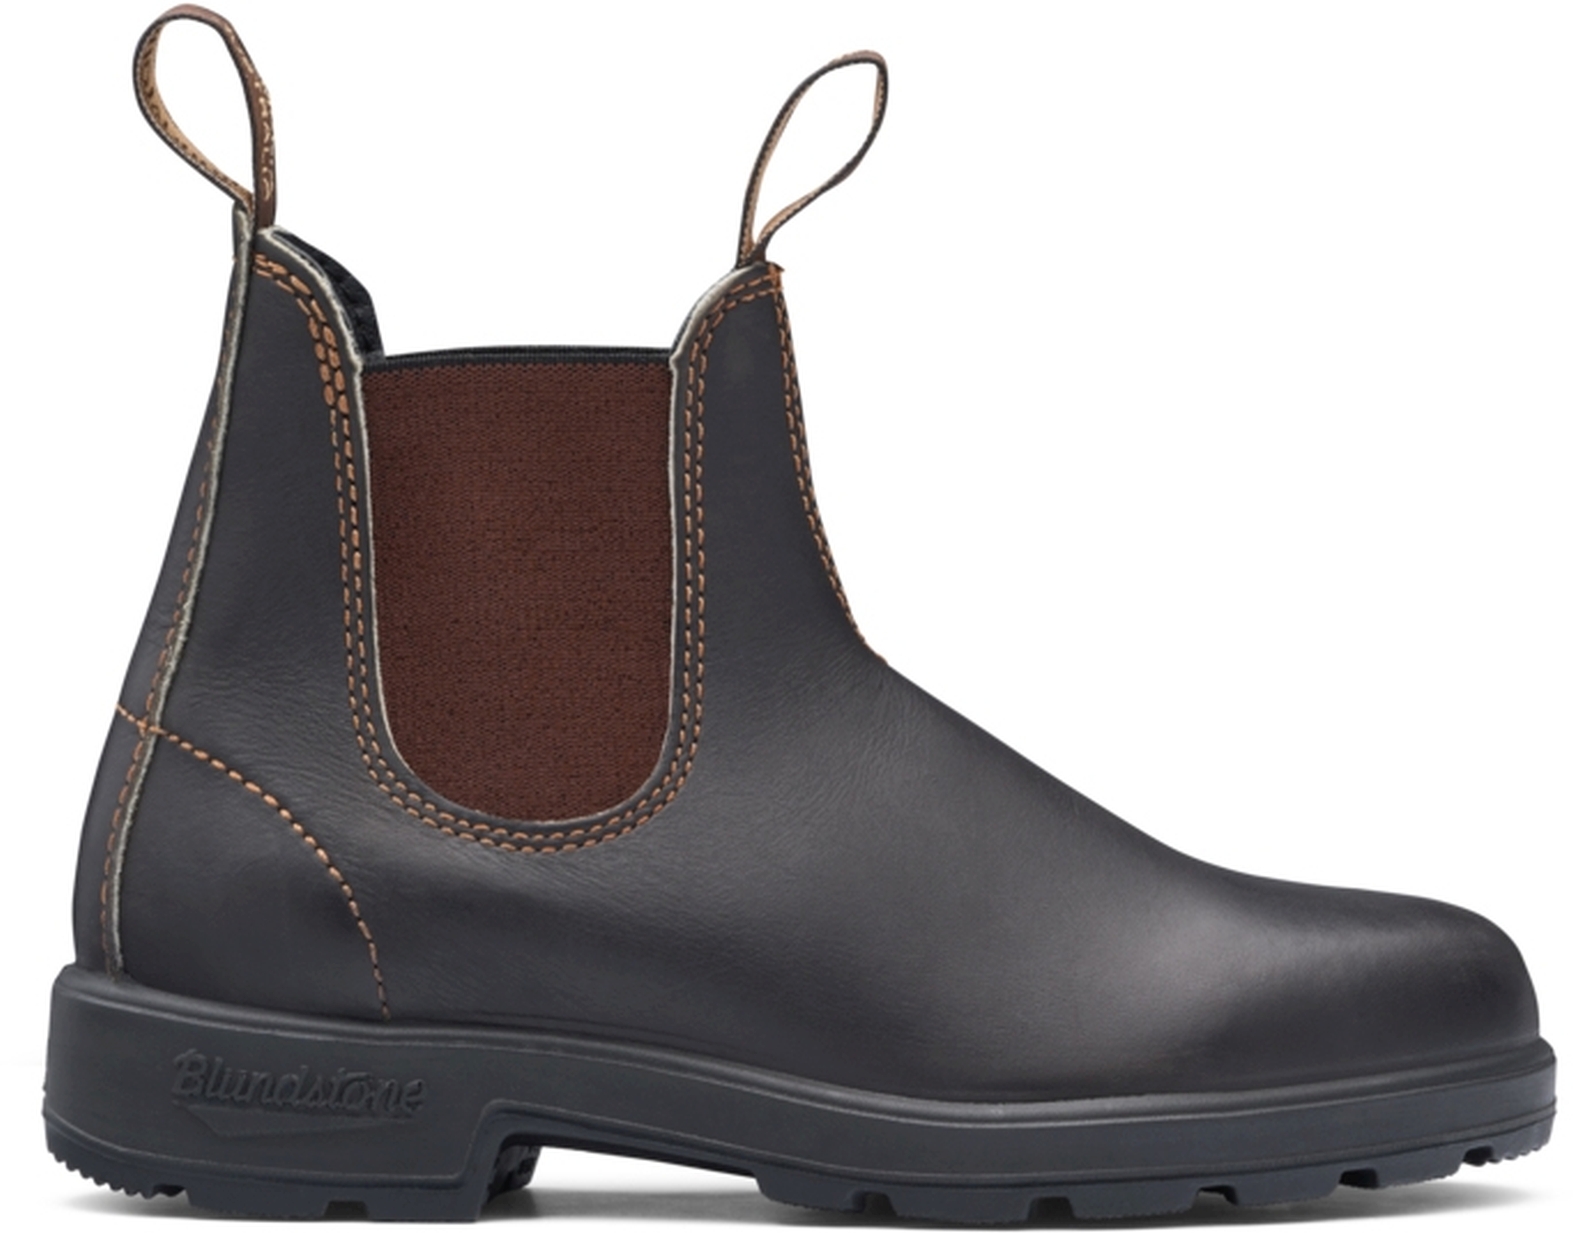 Blundstone Blundstone 500 Stout Brown Leather (500 Series) Calf leather